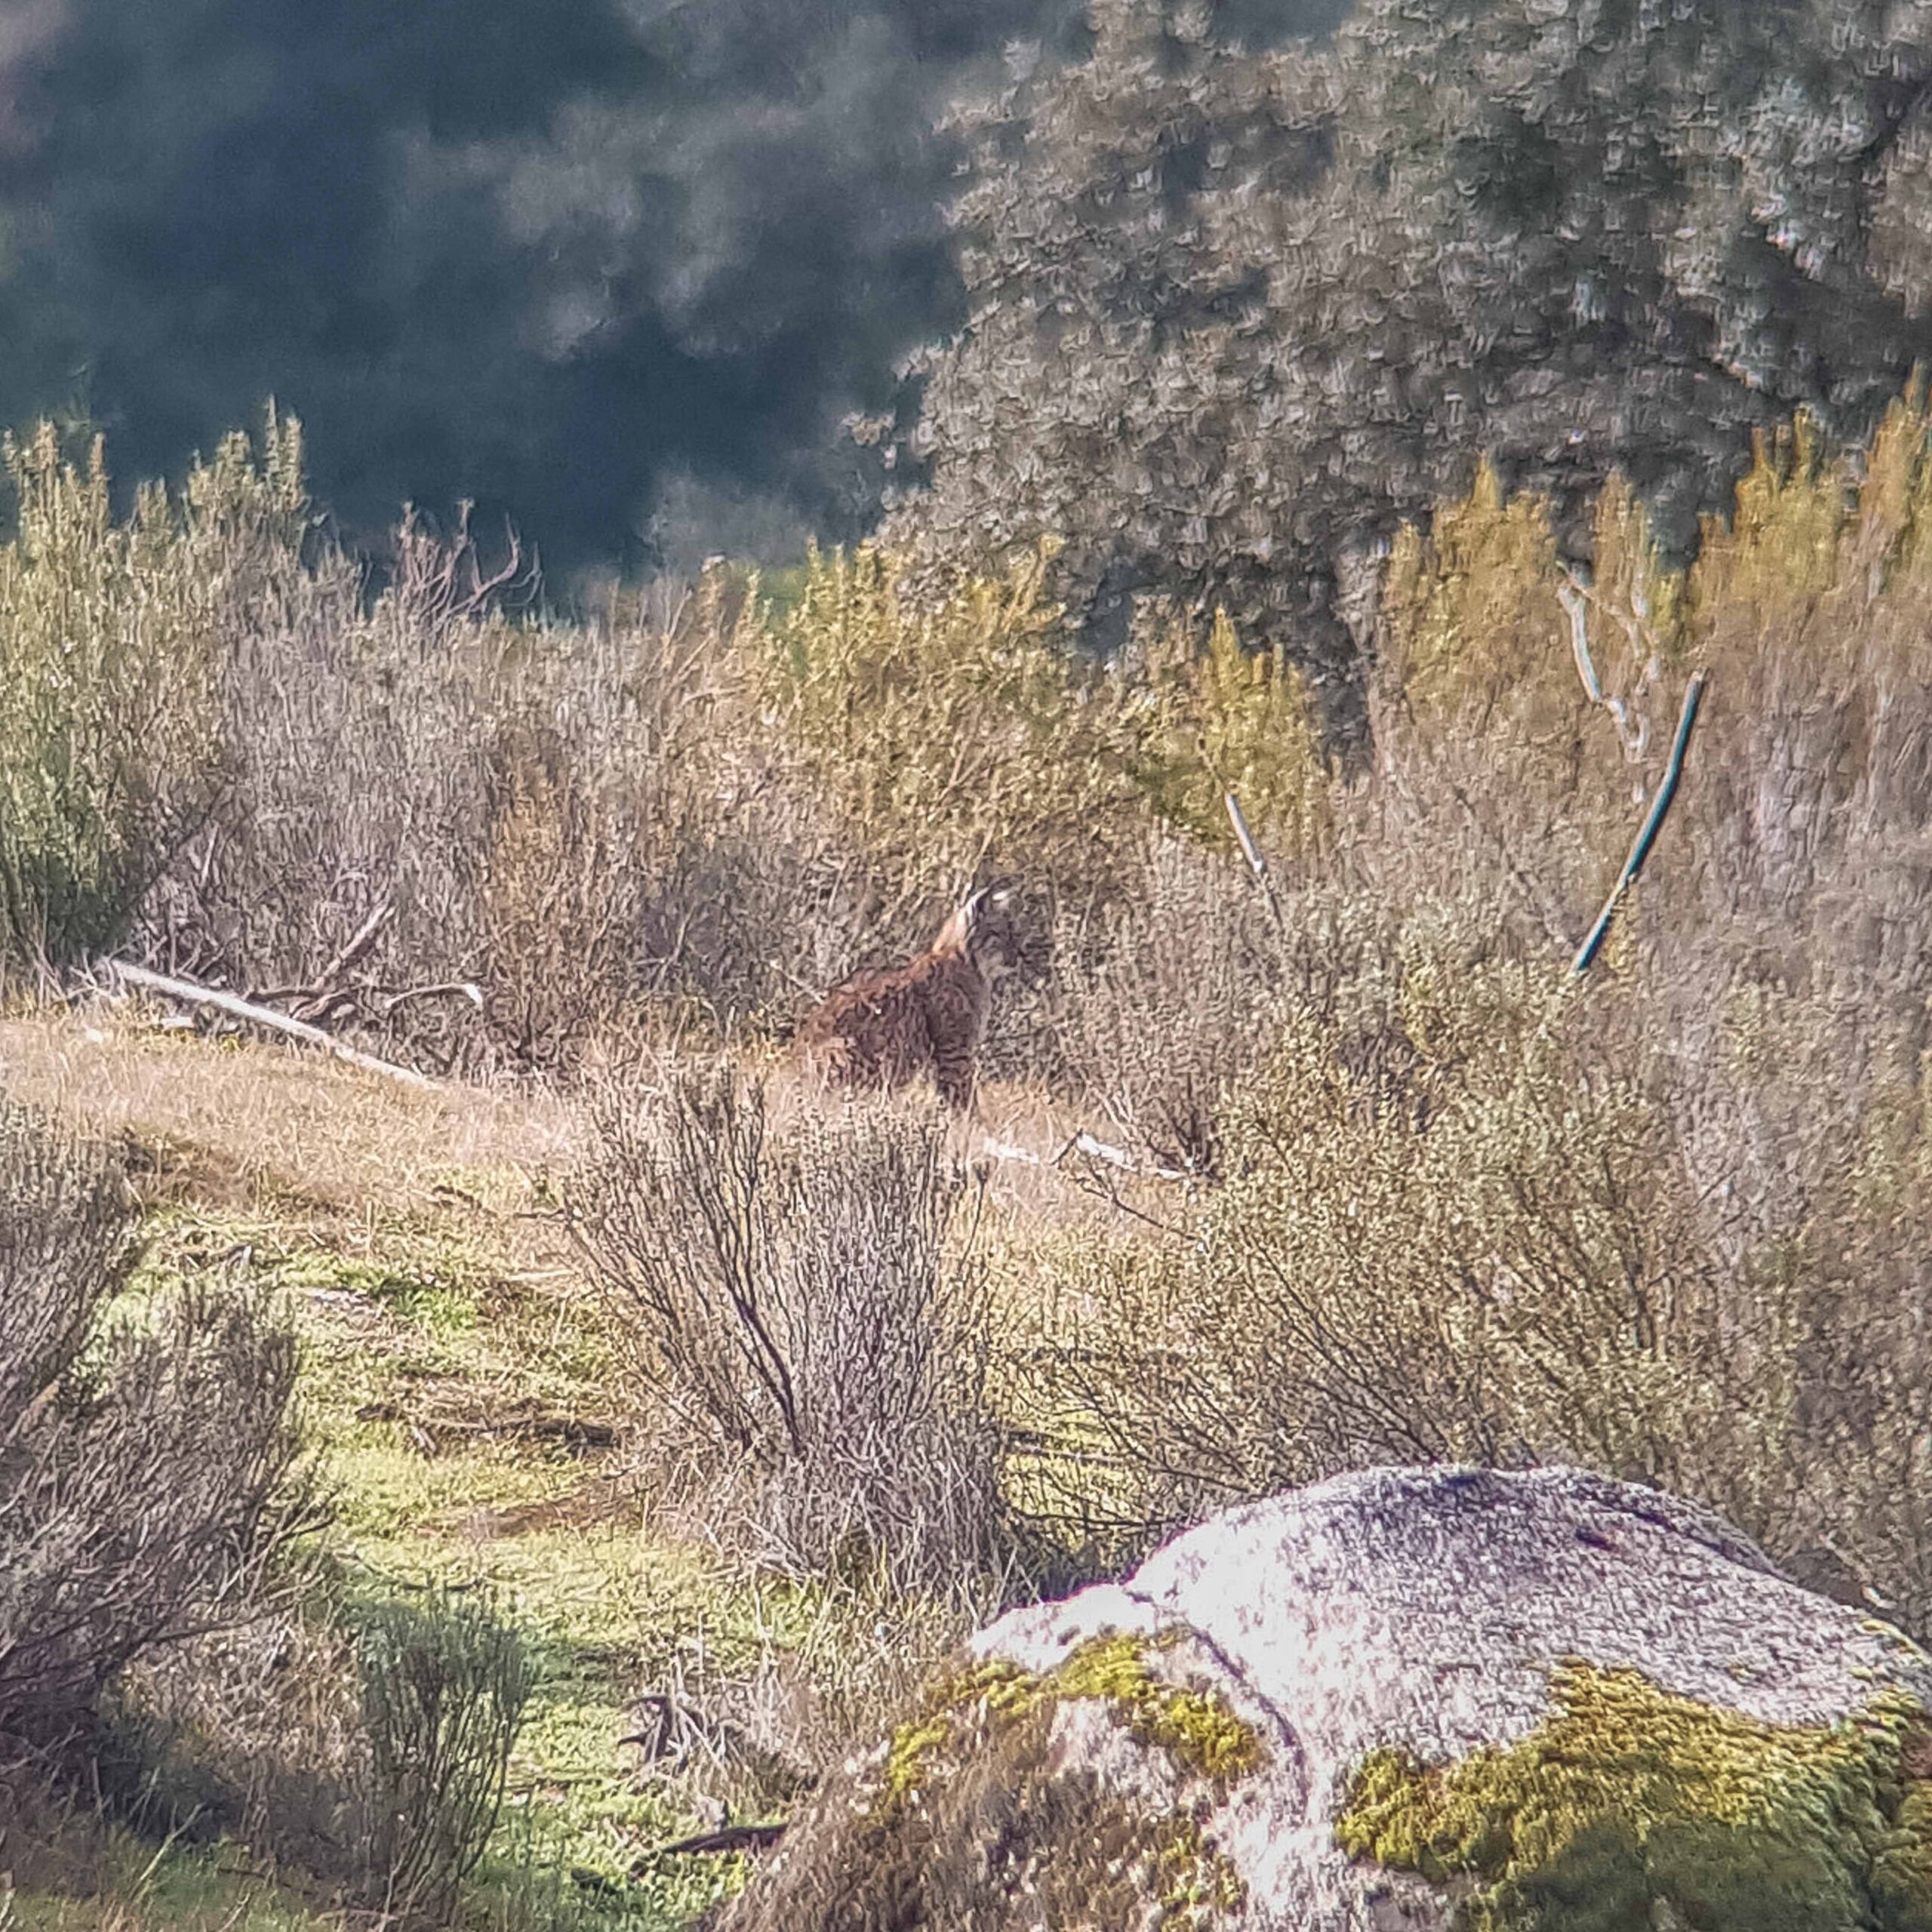 Young Iberian Lynx (Lynx pardinus) sitting, seen by telescope in Andújar Natural Park, Provincia de Jaén, Andalusia, Spain